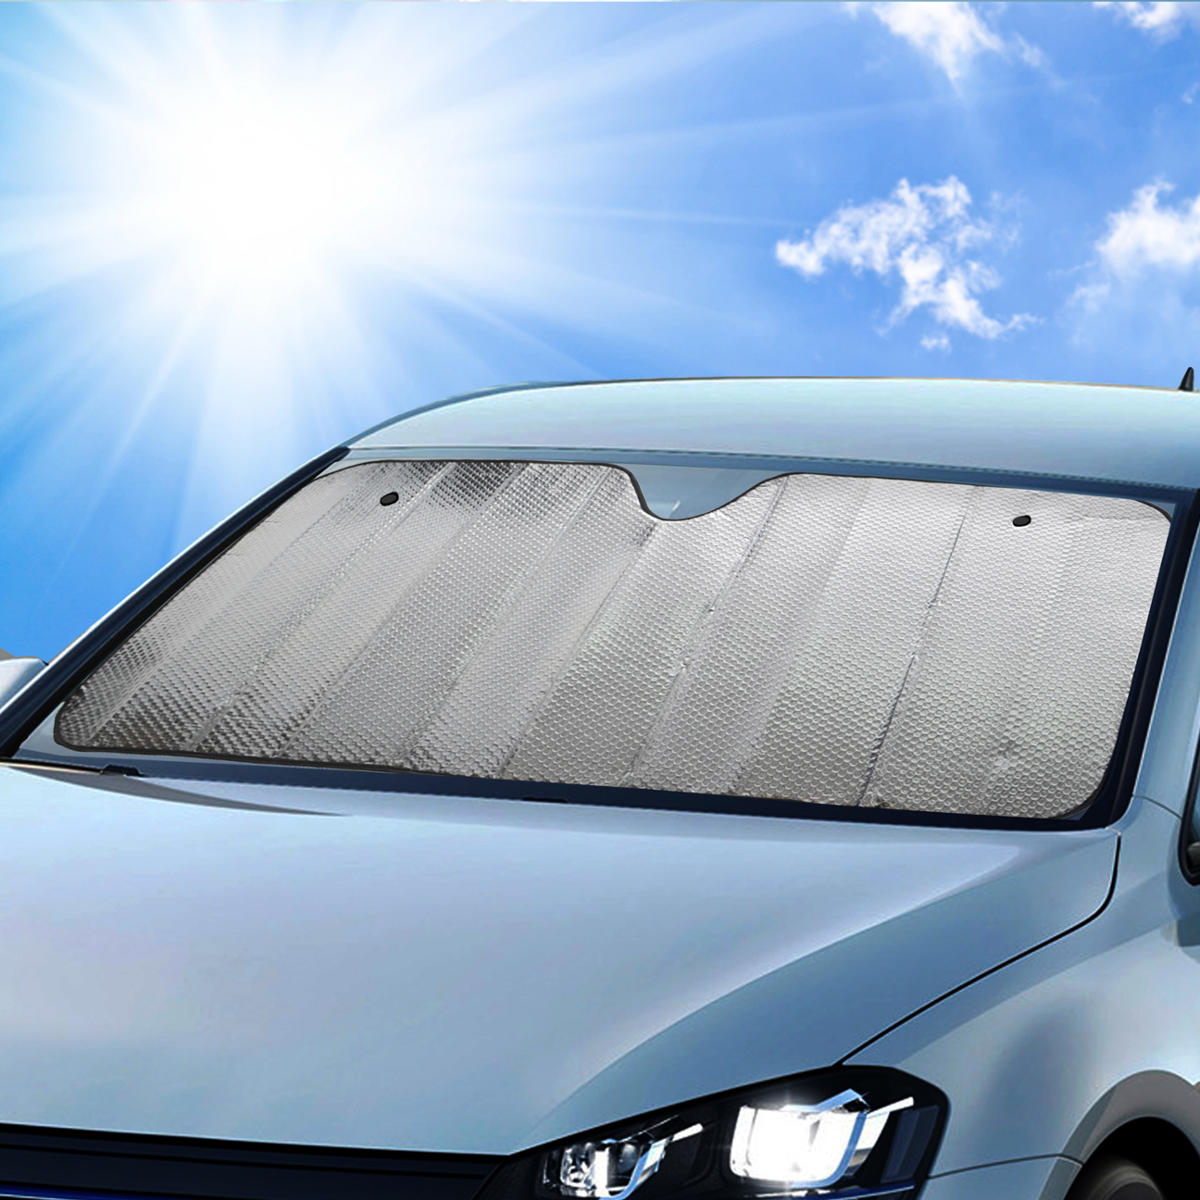 BDK Standard Chrome Double Bubble Folding Accordion Auto Windshield Sun Shade - Blocks UV Rays Sun Visor Protector, Sunshade to Keep Your Vehicle Cool and Damage Free, Easy to Use - 58 x 24 in, AS-215